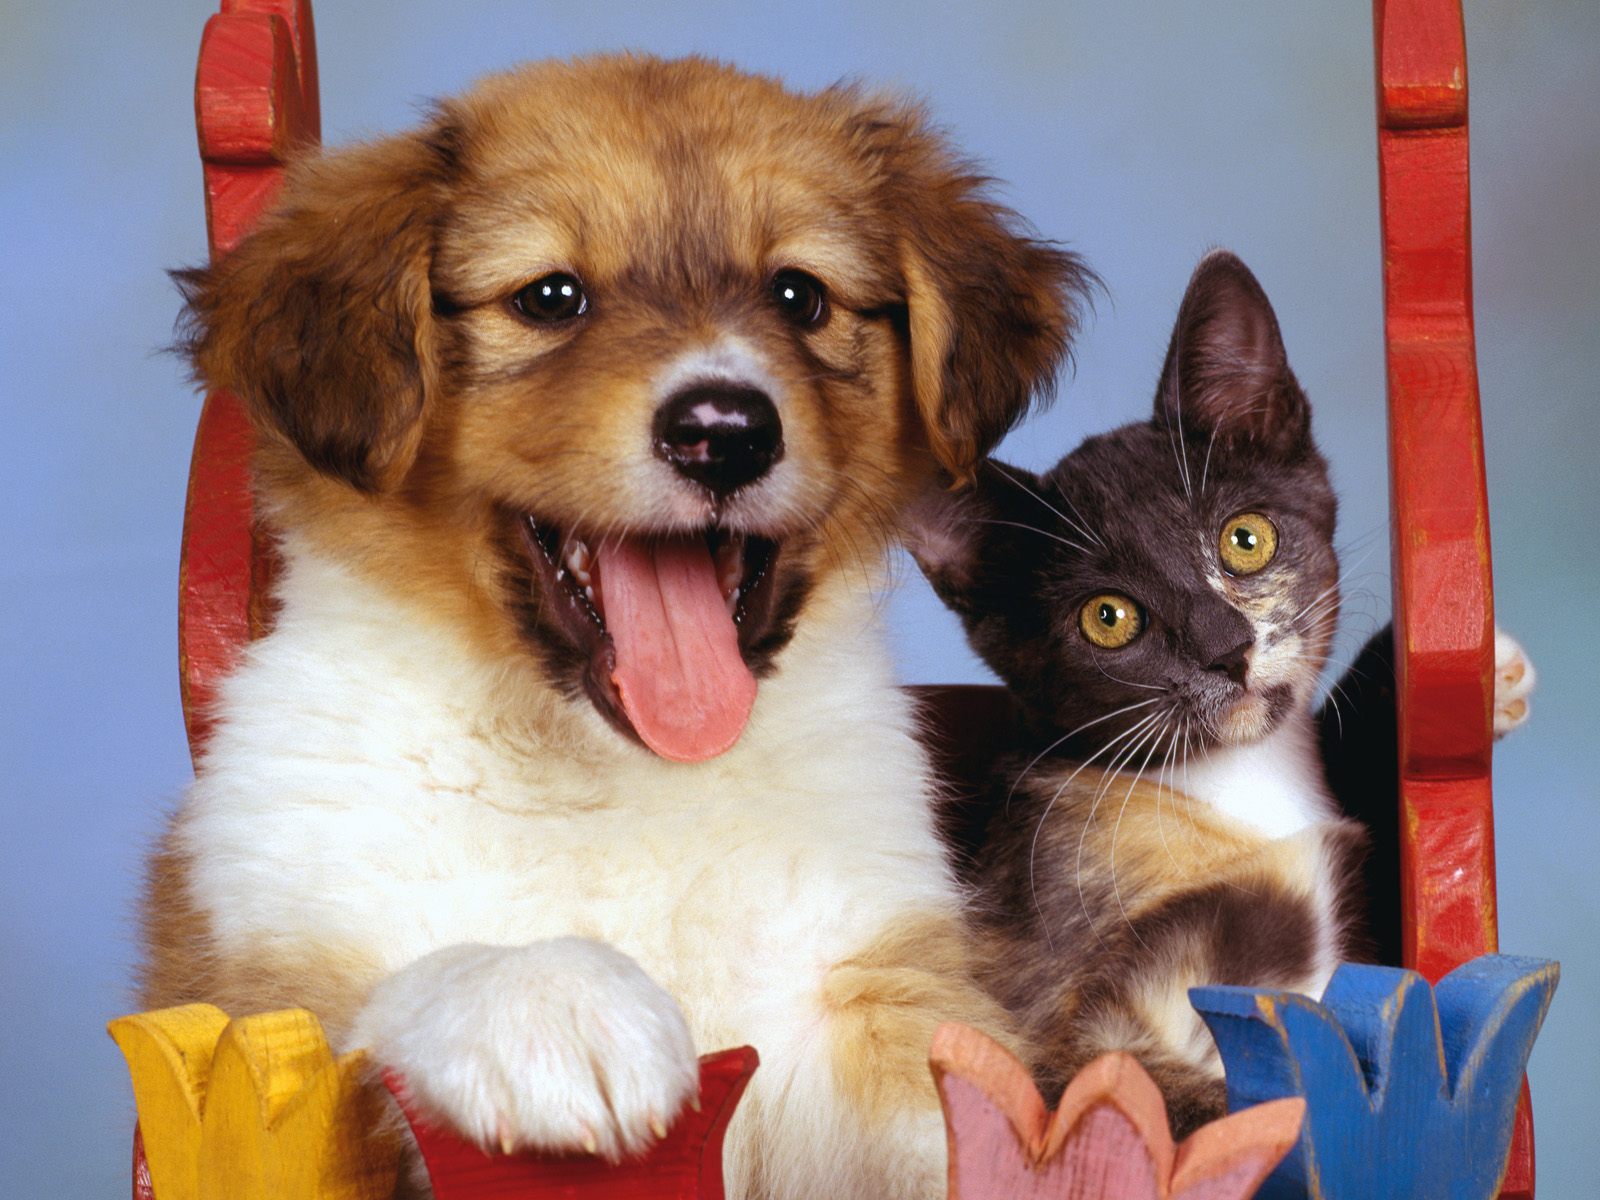  Dogs and Cats Backgrounds Wallpaper and make this wallpaper for your